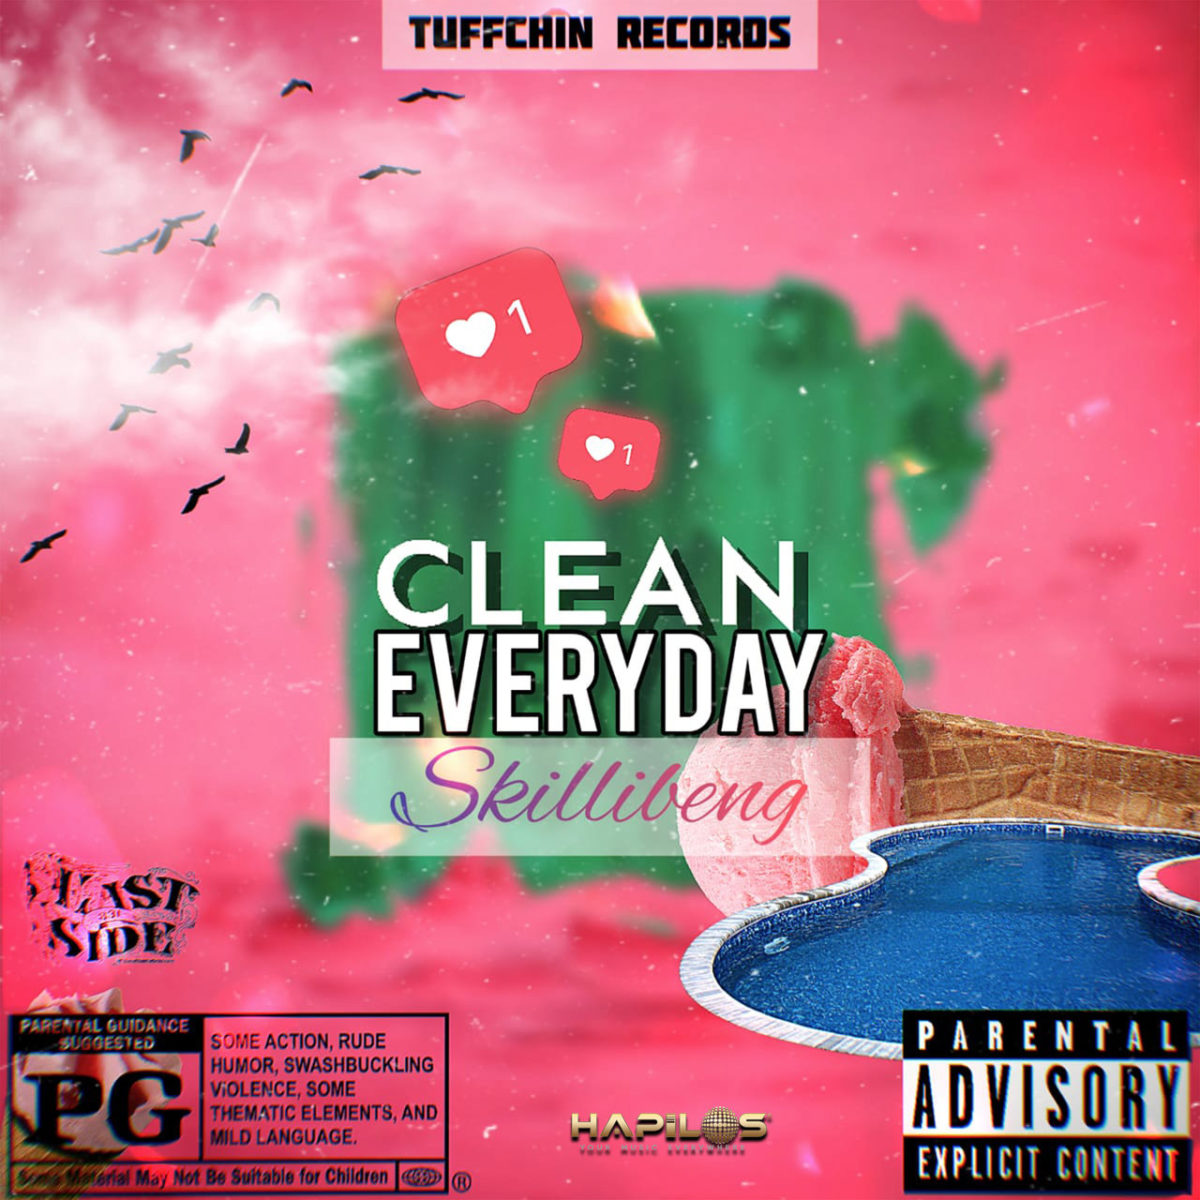 Skillibeng - Clean Everyday (Cover)